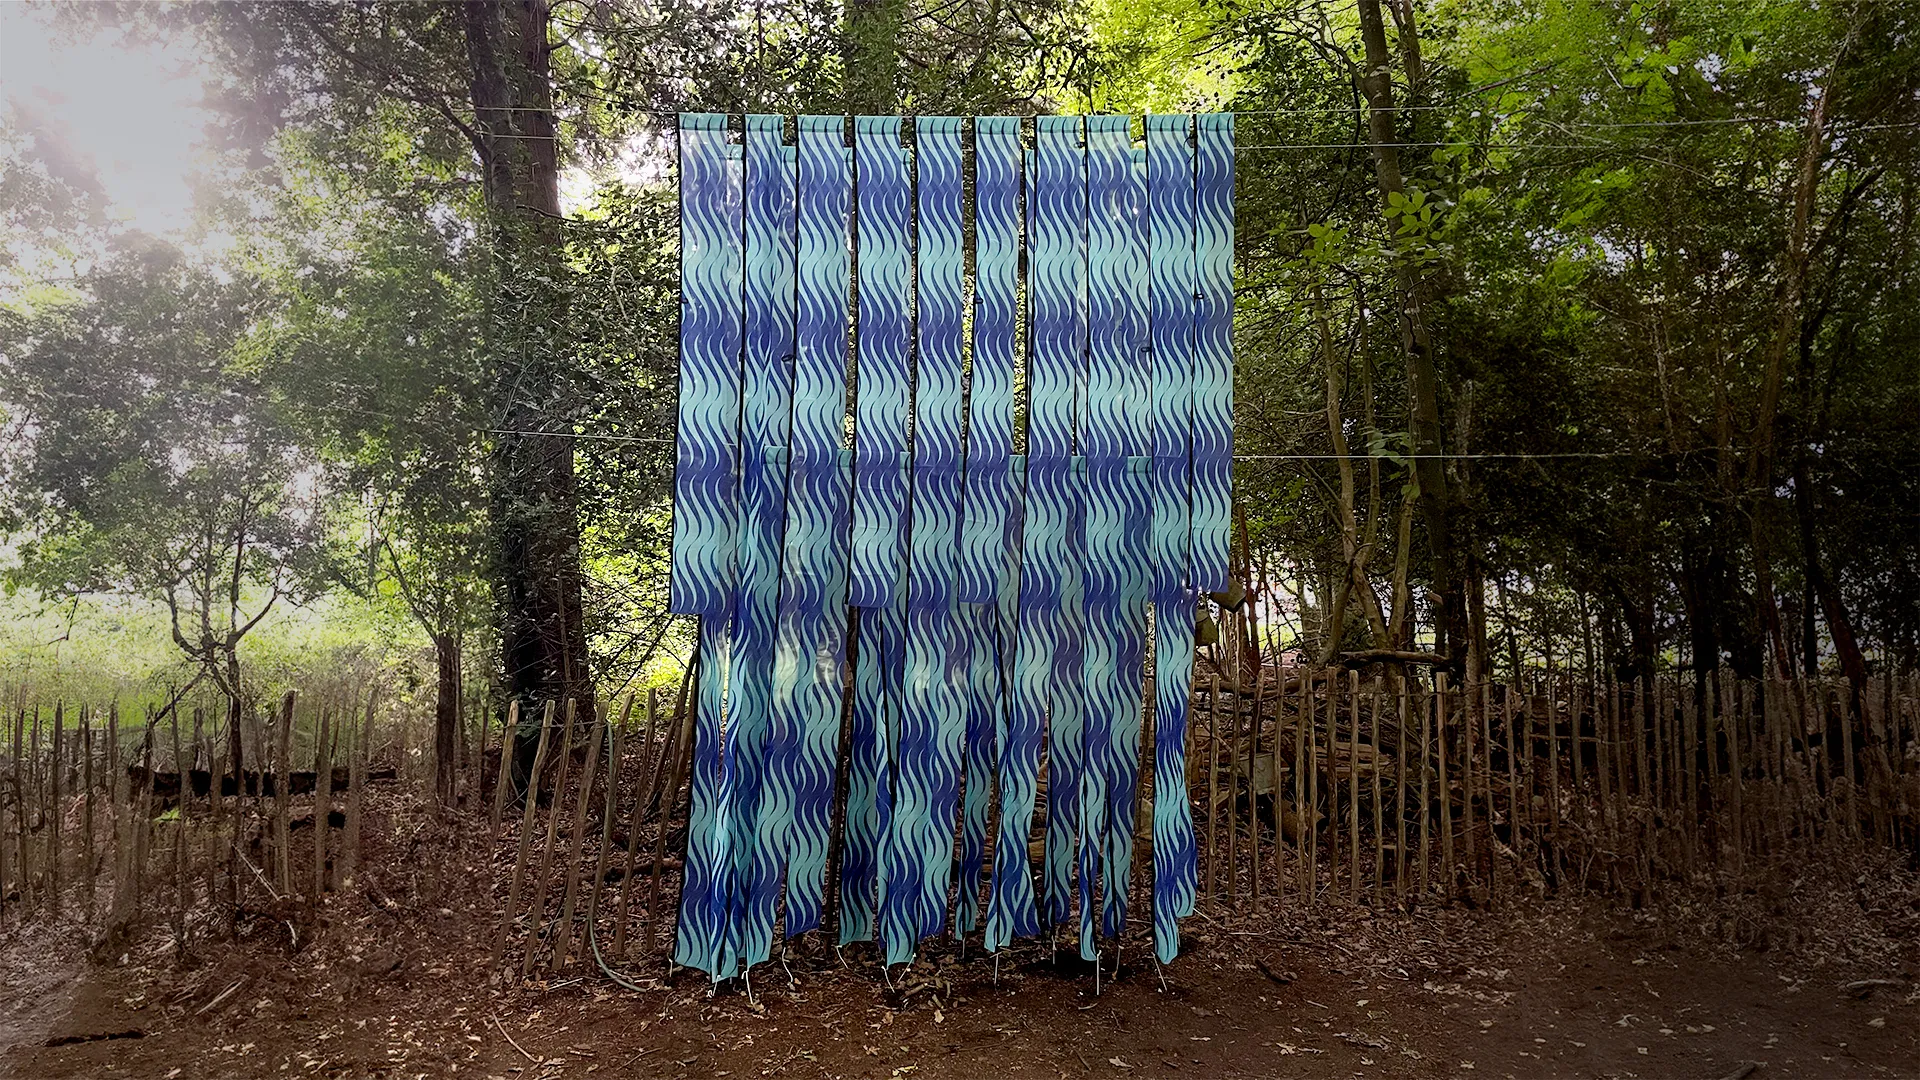 A sculpture in a forest. It is made of long strips of a repeat pattern on flag material. The repeat design is seagreen and ultramarine blue waves. 